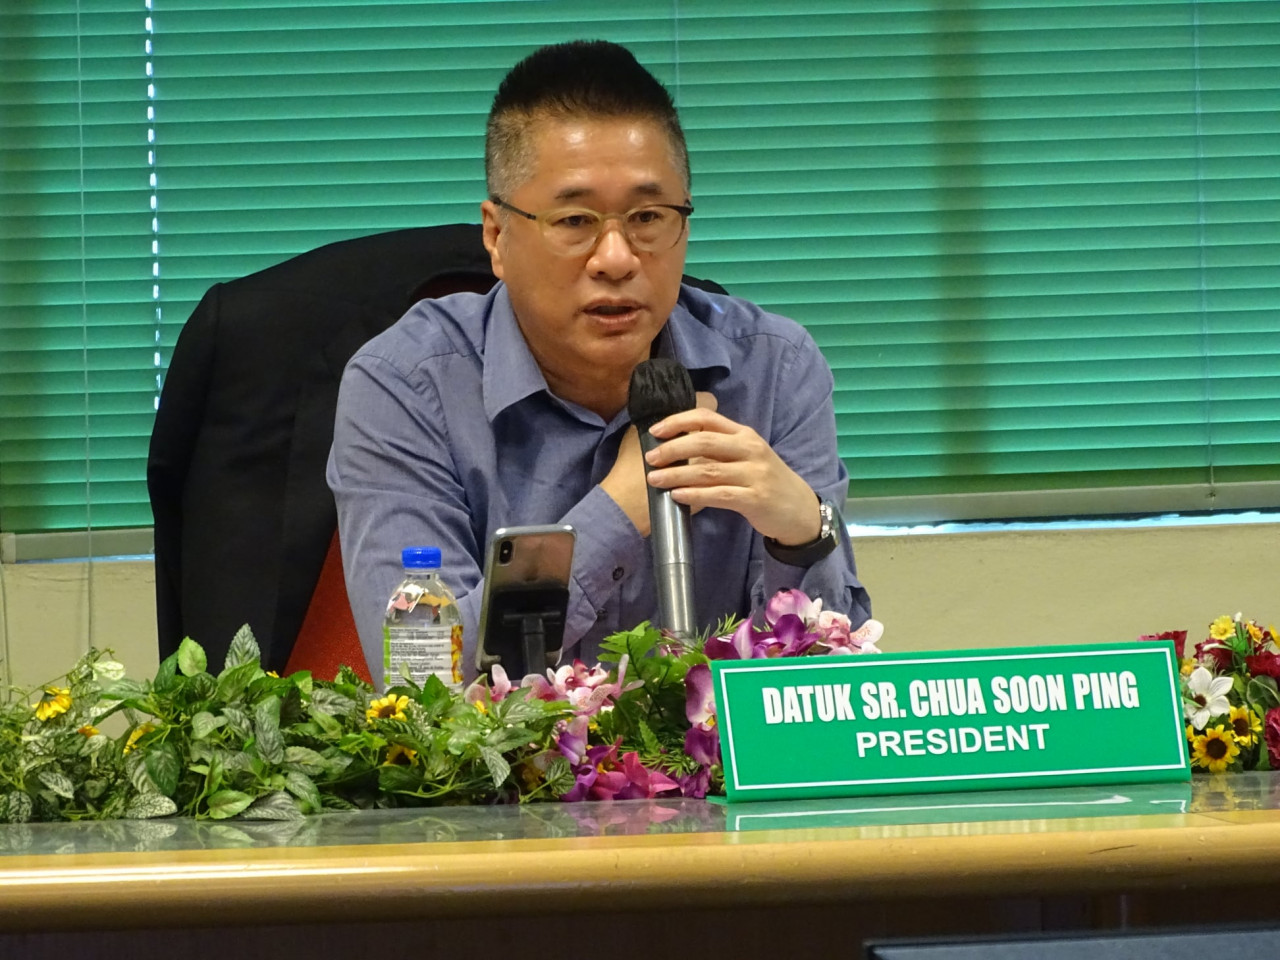 Shareda president Datuk Chua Soon Ping says association members are told to not compete with one another, so as to prevent a property overhang. – Shareda Association Facebook pic, April 22, 2021